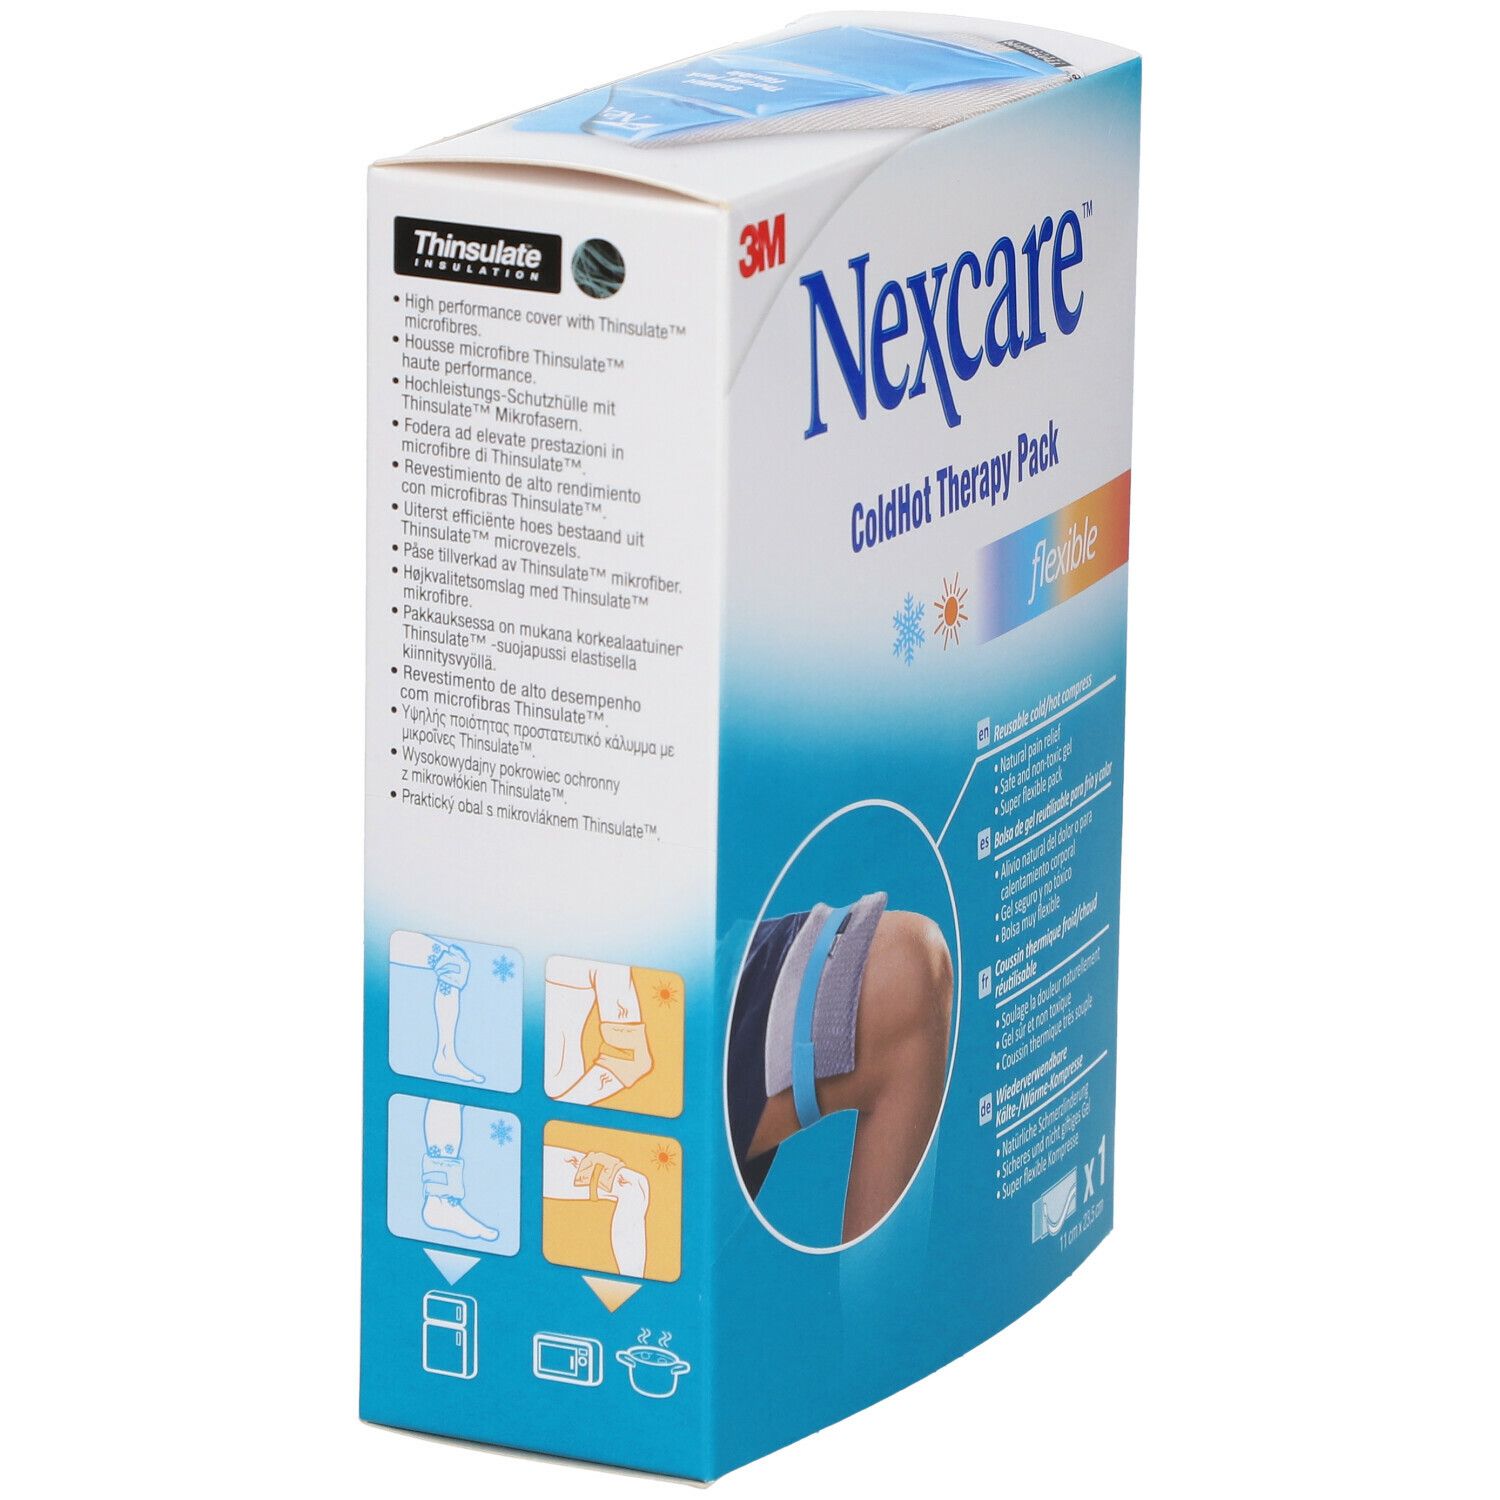 Nexcare™ ColdHot flexible pack